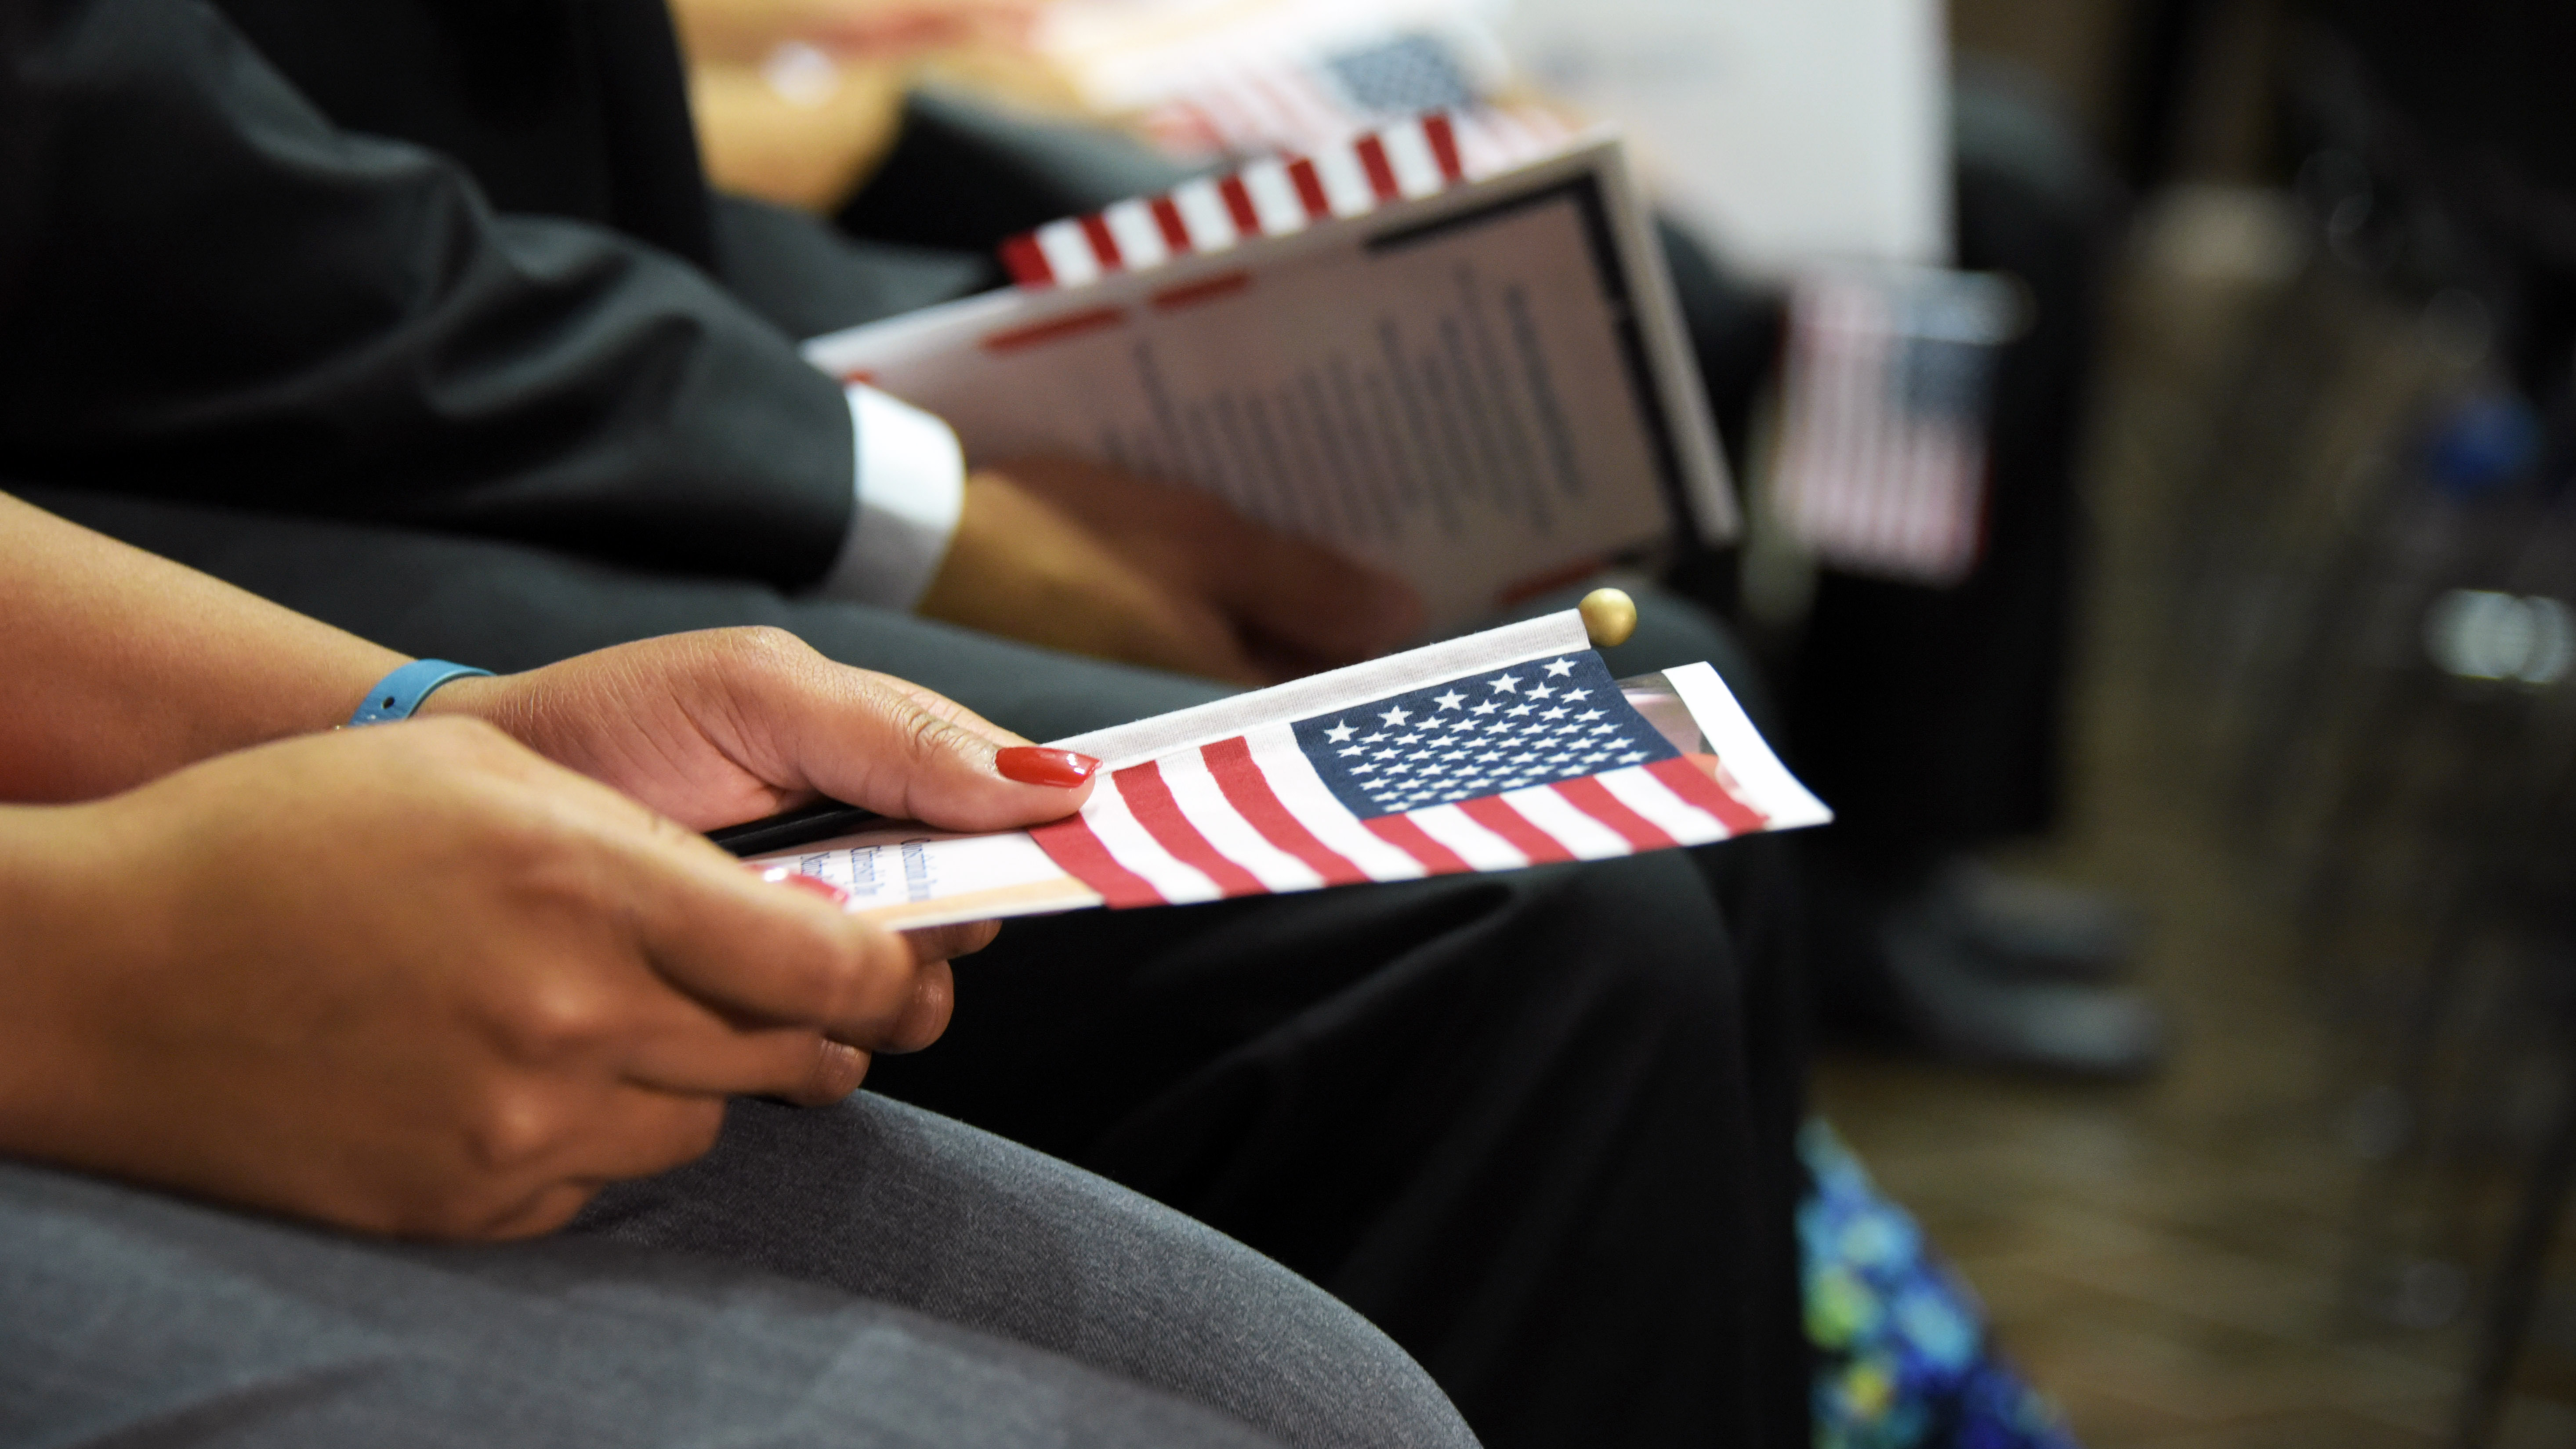 Flags held during a naturalization ceremony